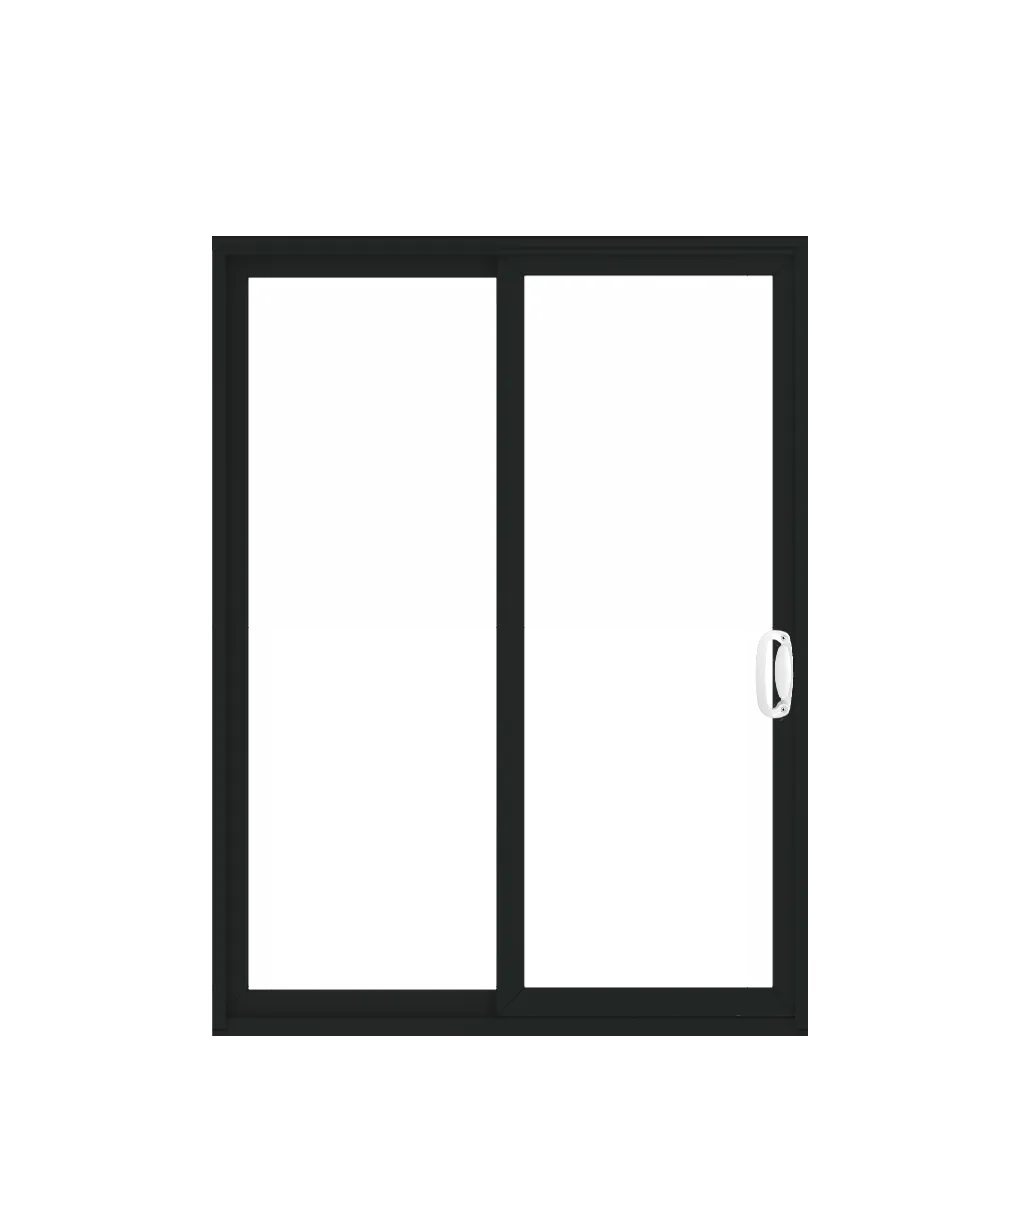 ANDERSEN PS510 200 Series Permashield 70-1/2" X 79-1/2" Sliding/Gliding Dual Pane Or Triple Pane Low-E Tempered Argon Fill Stainless Glass 2 Panel Patio Door Grilles/Screen Options